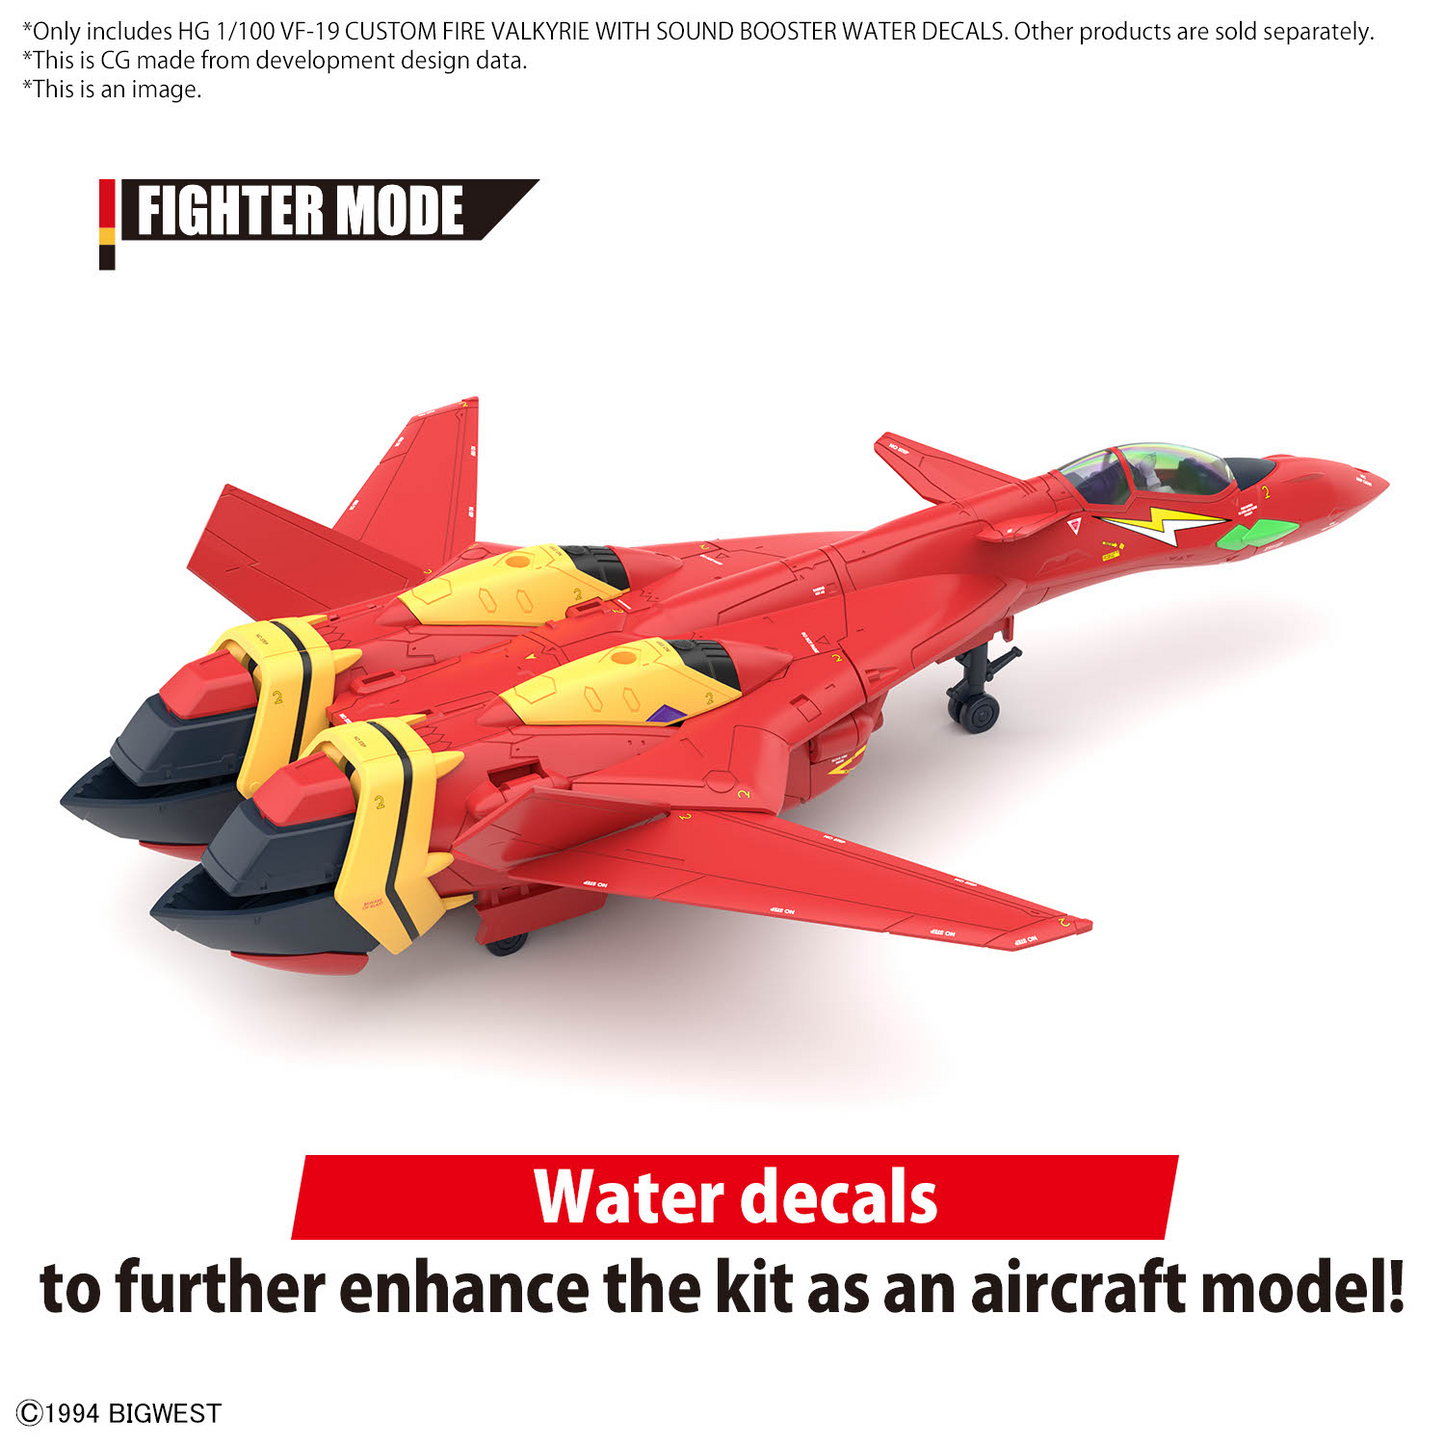 BANDAI Hobby HG 1/100 VF-19 CUSTOM FIRE VALKYRIE WITH SOUND BOOSTER WATER DECALS